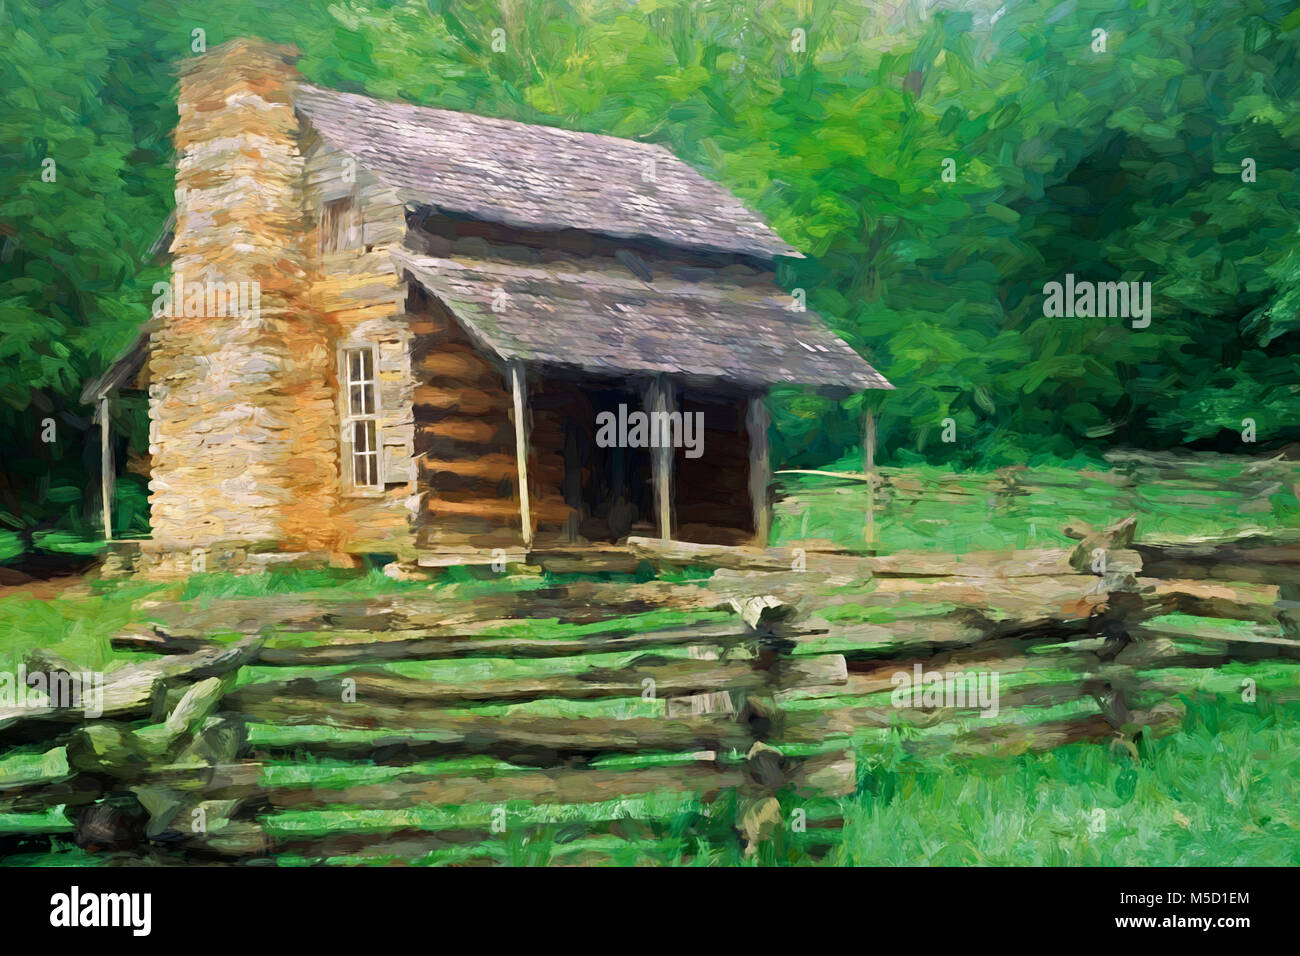 Impressionistic Art of the John Oliver Place in Cades Cove, Great Smoky Mountains National Park, Tennessee, United States Stock Photo